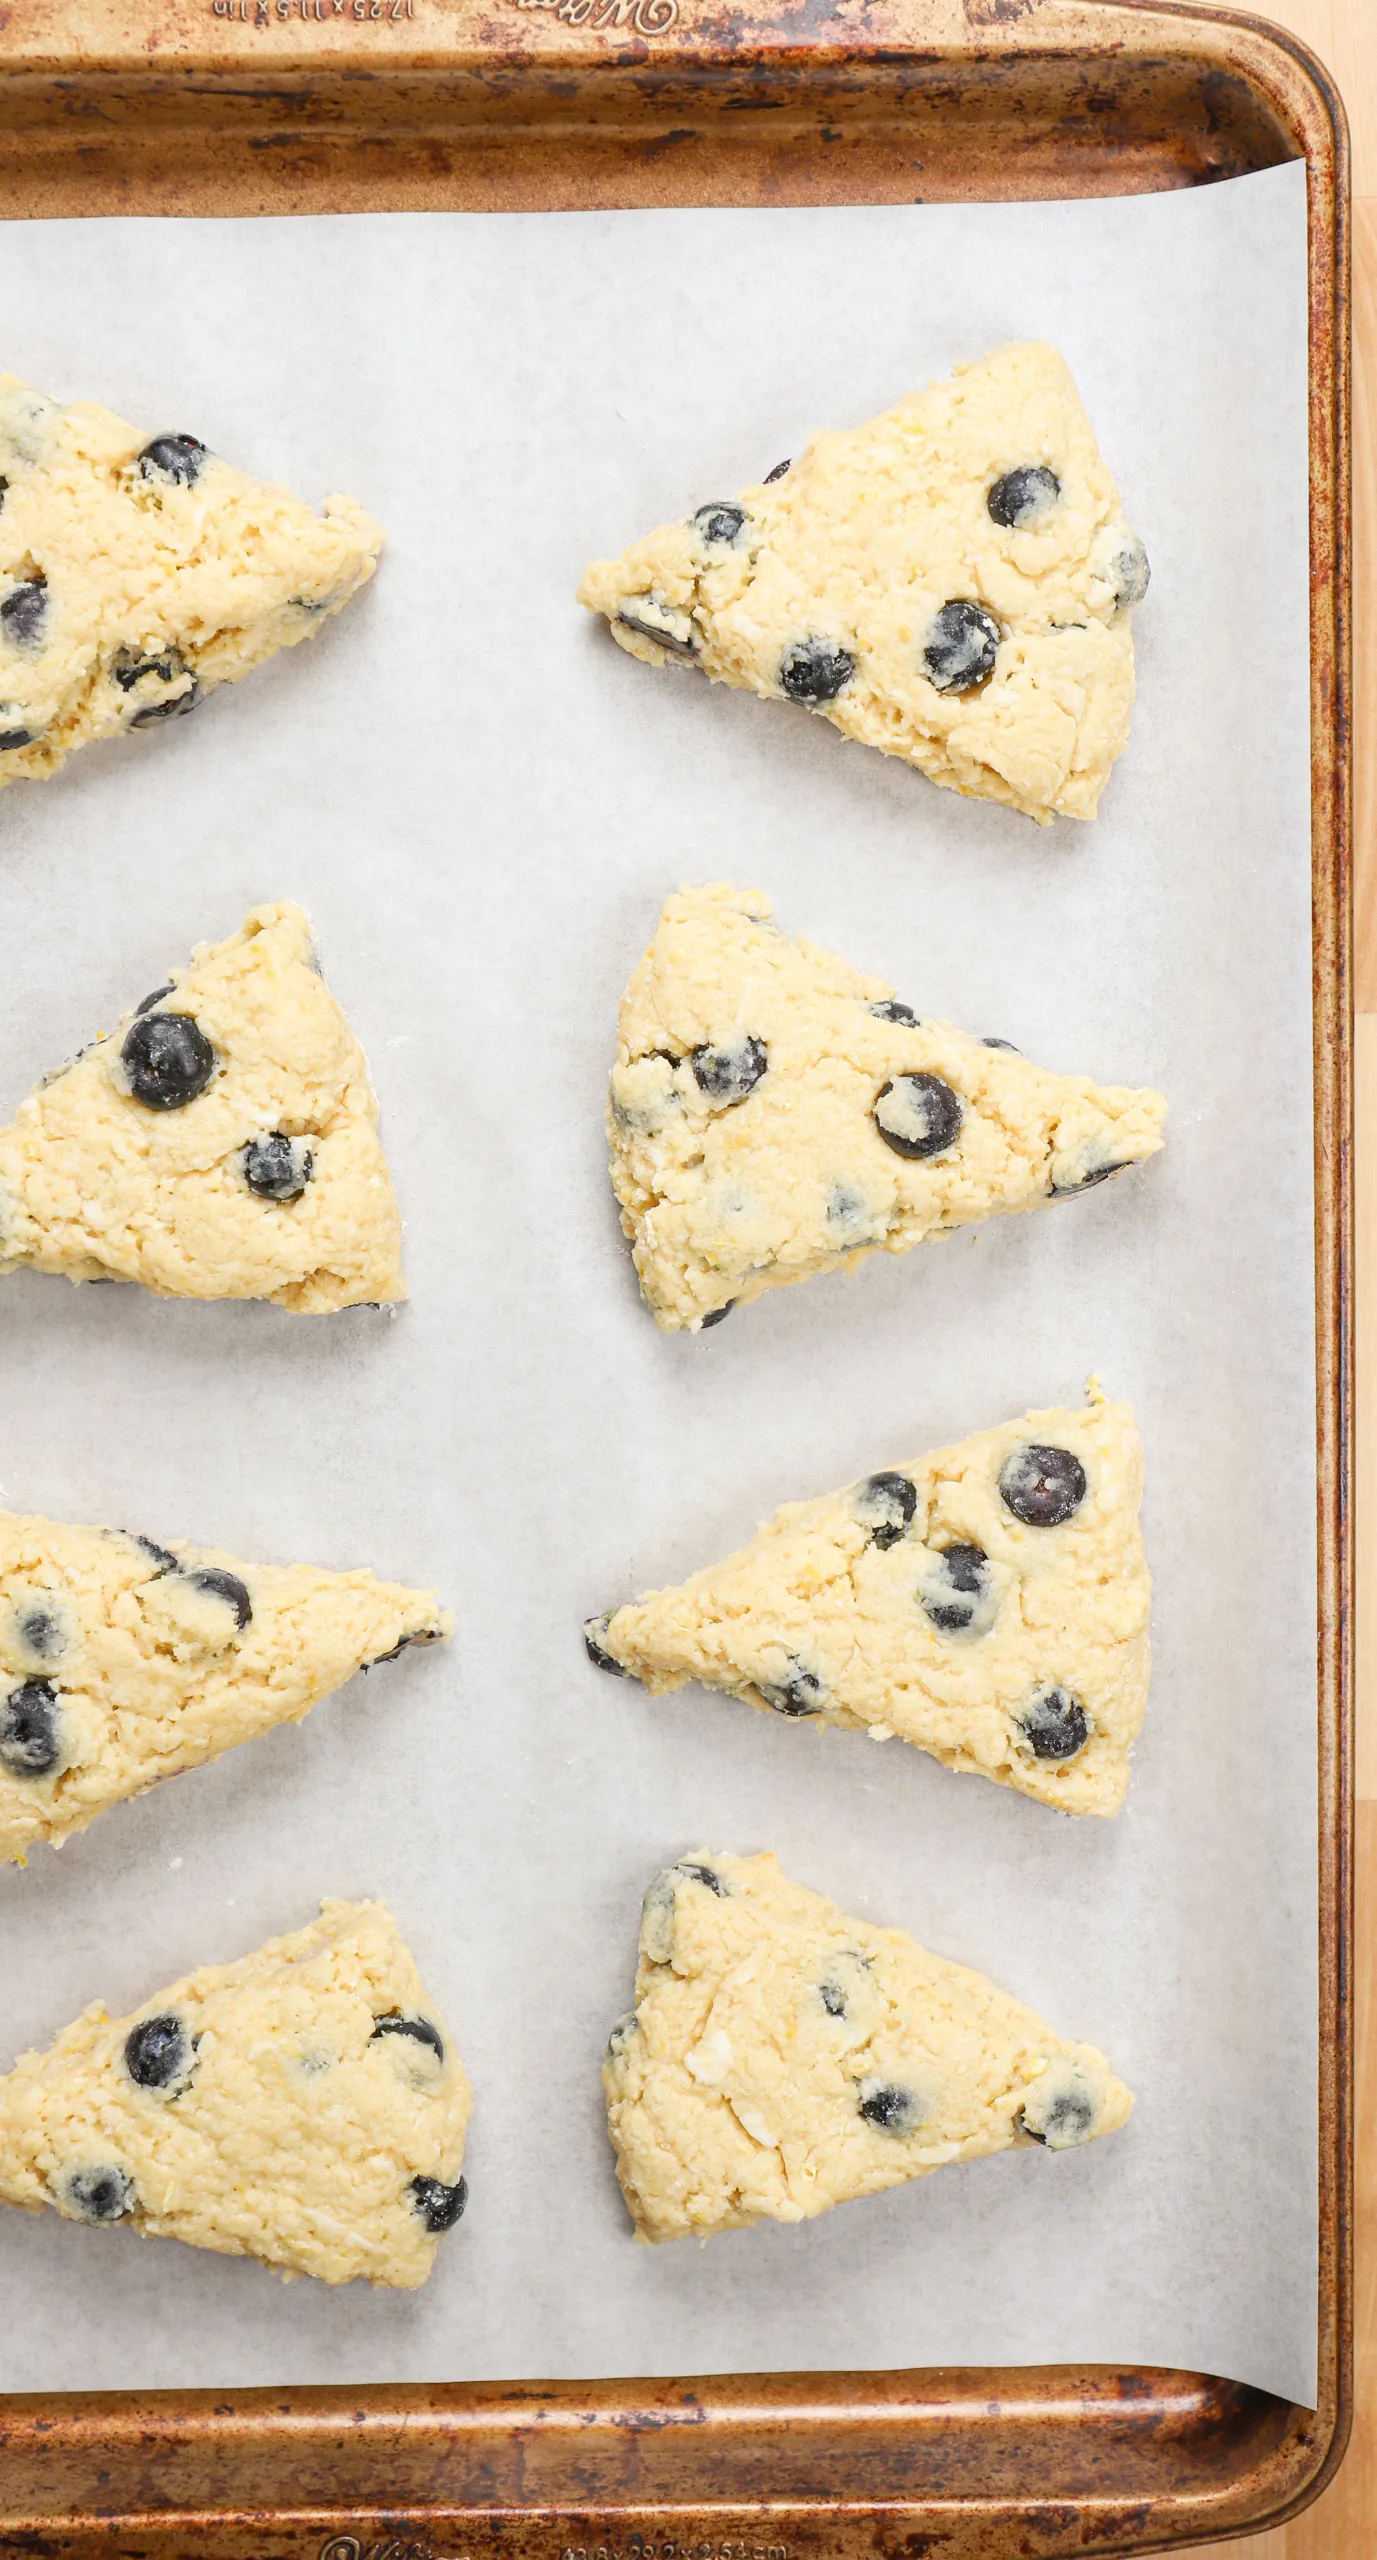 Overhead view of a batch of lemon blueberry scones on a parchment paper lined baking sheet before baking.